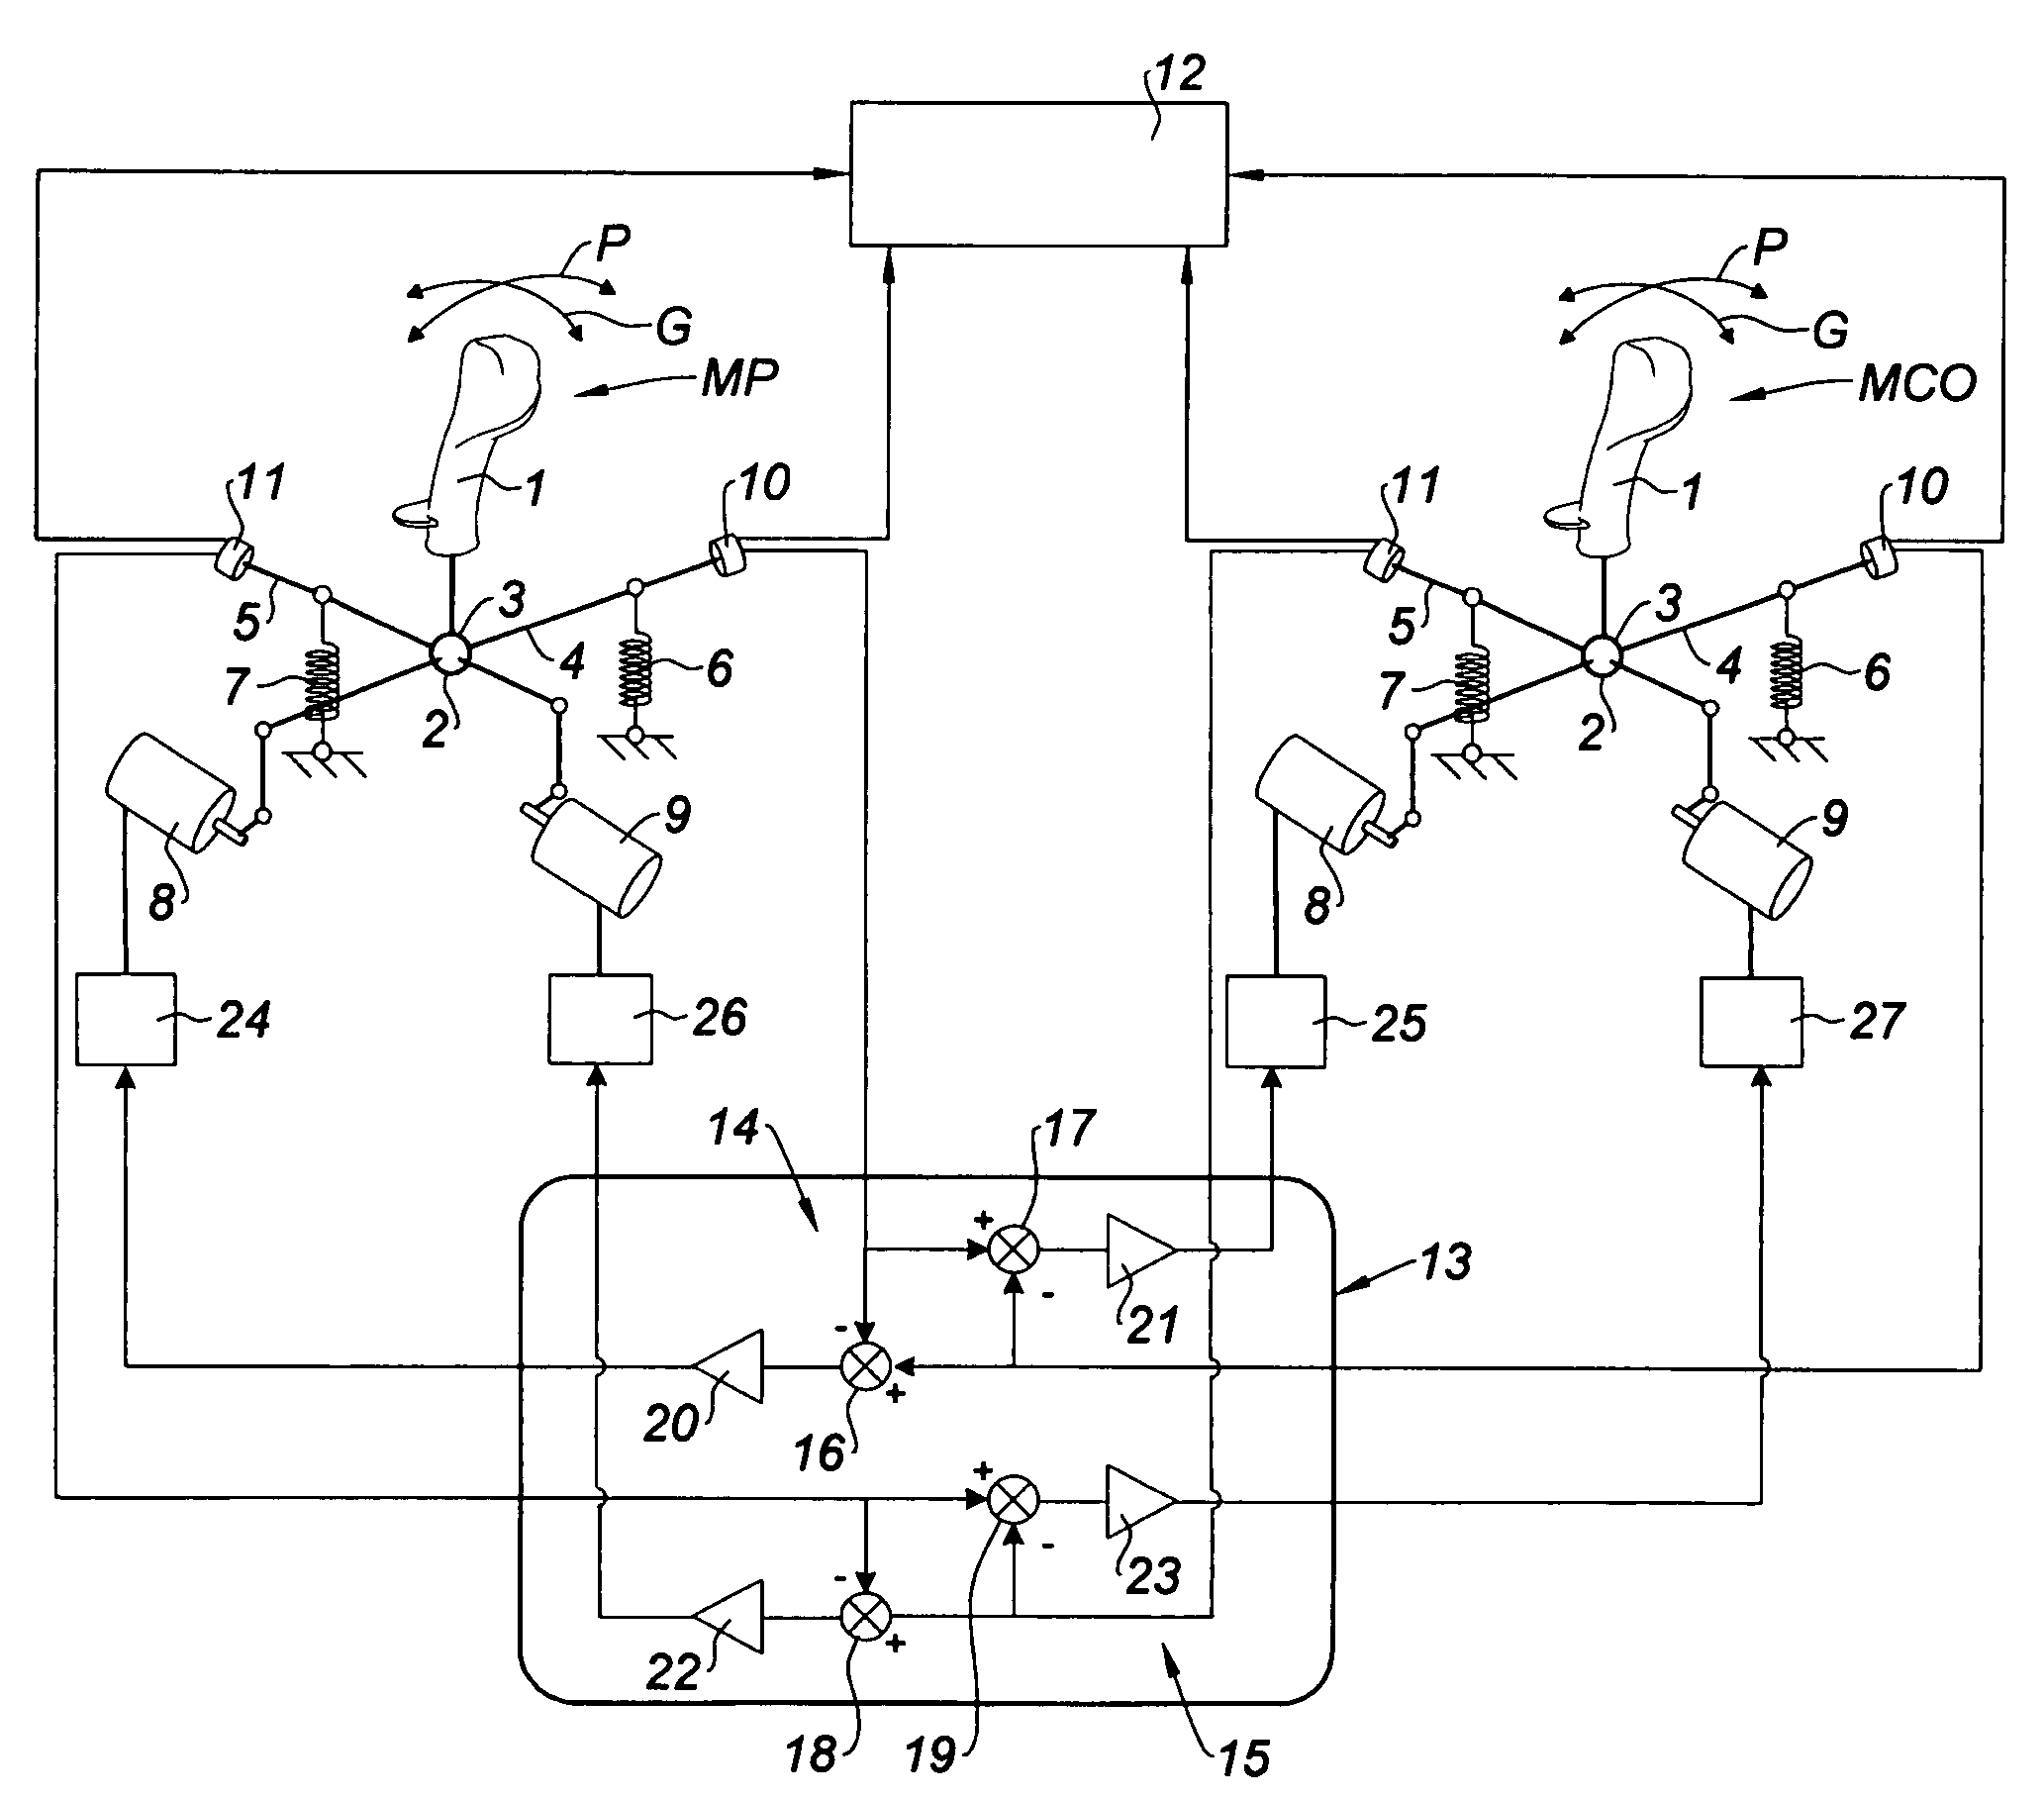 Control system including two control columns that are coupled to enable controlled members to be placed in required positions